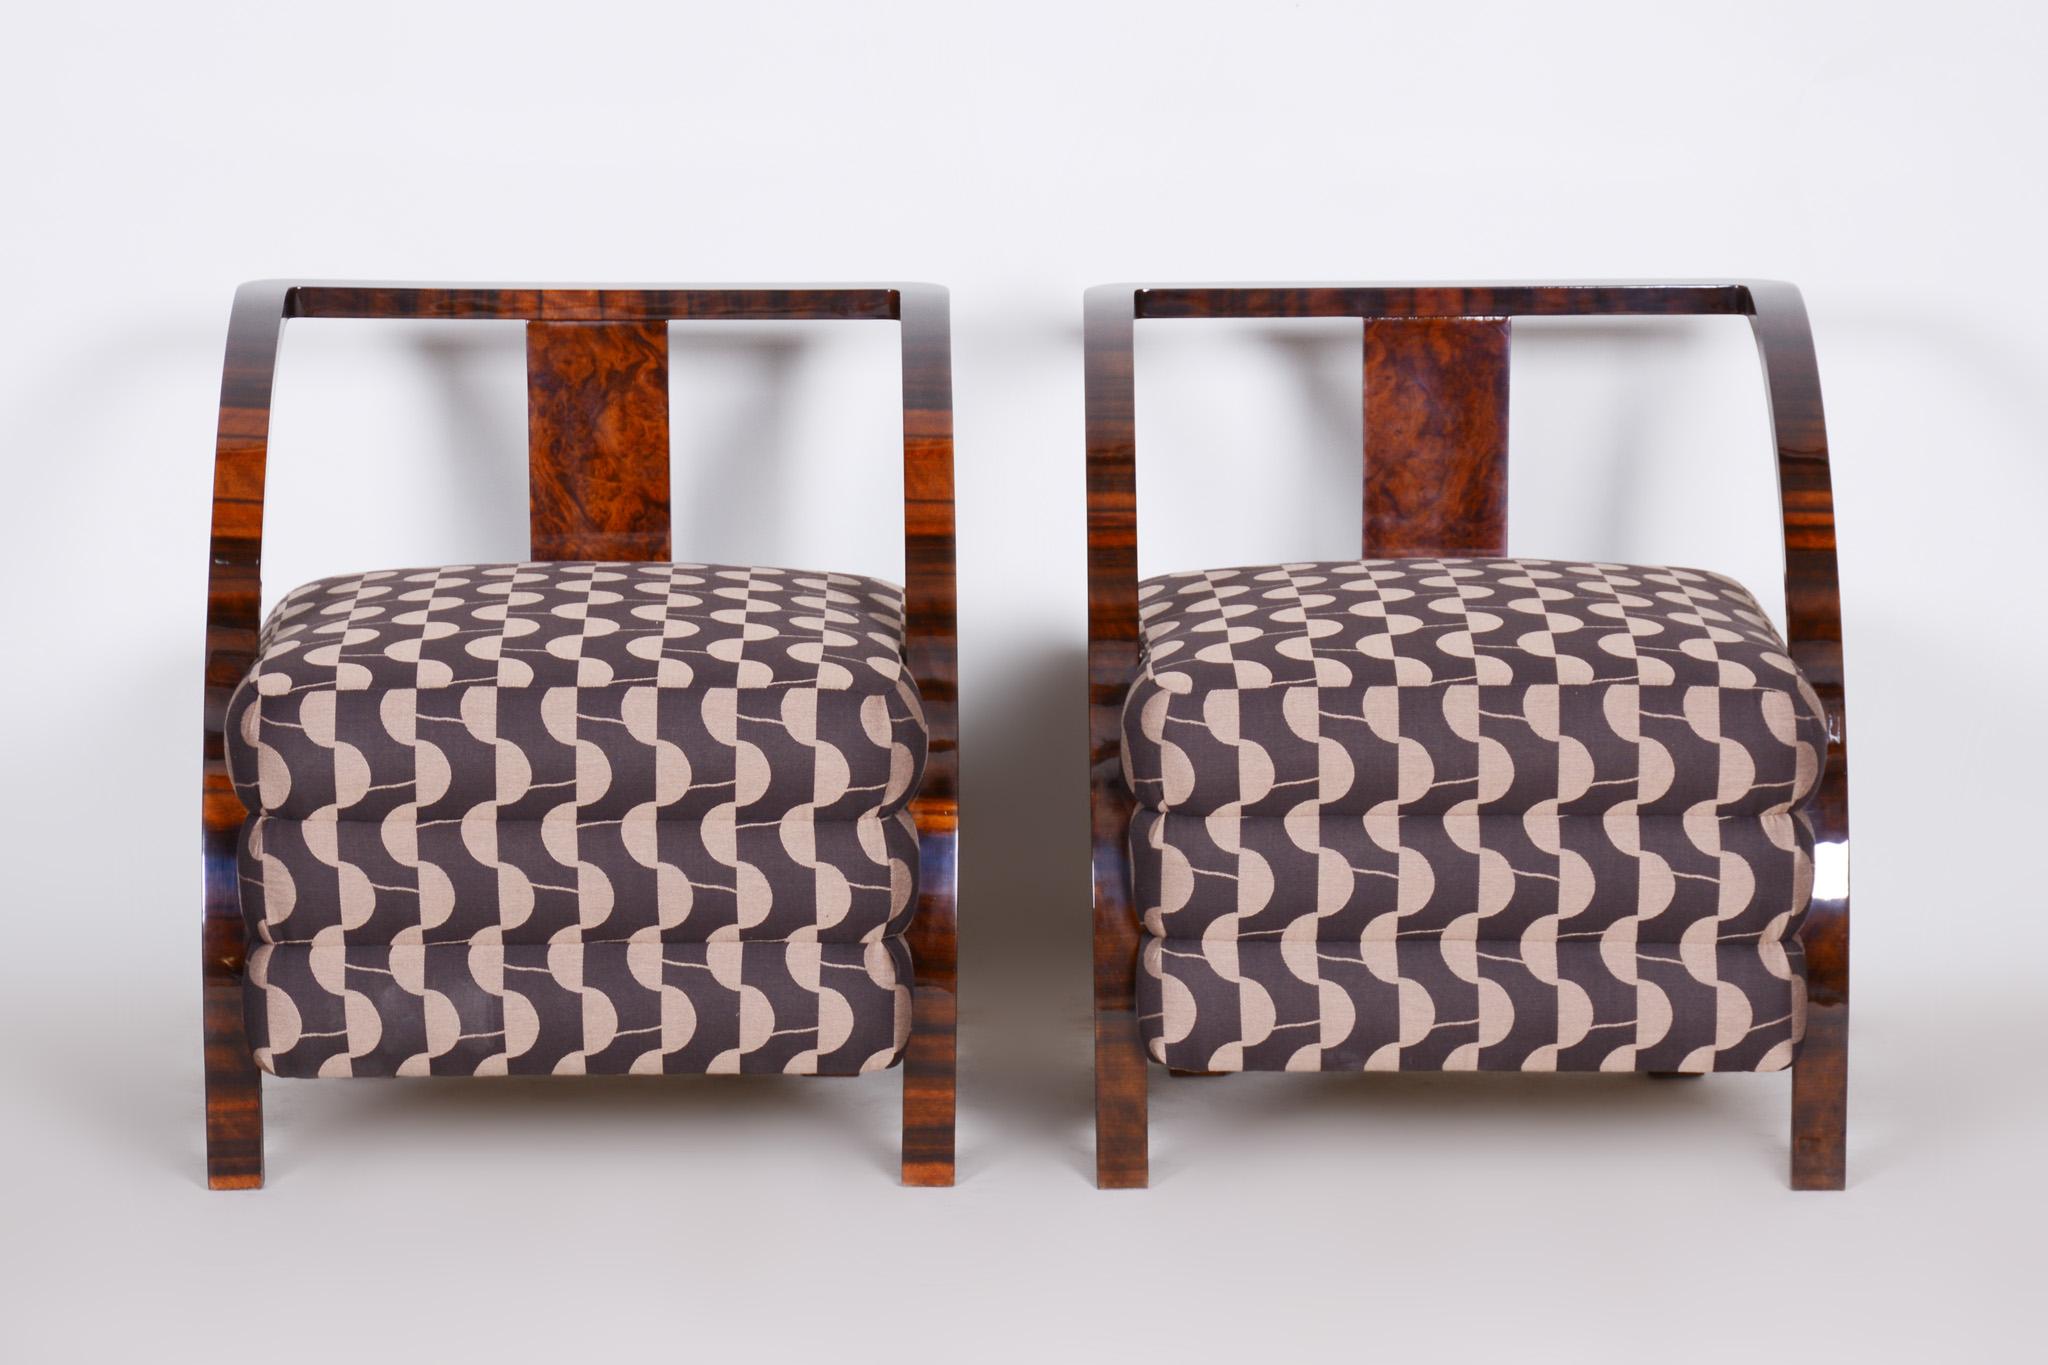 Art Deco armchairs.
Material: Walnut
Source: Czechia (Bohemia)
Period: 1920-1929
Completely restored and upholstered.
 